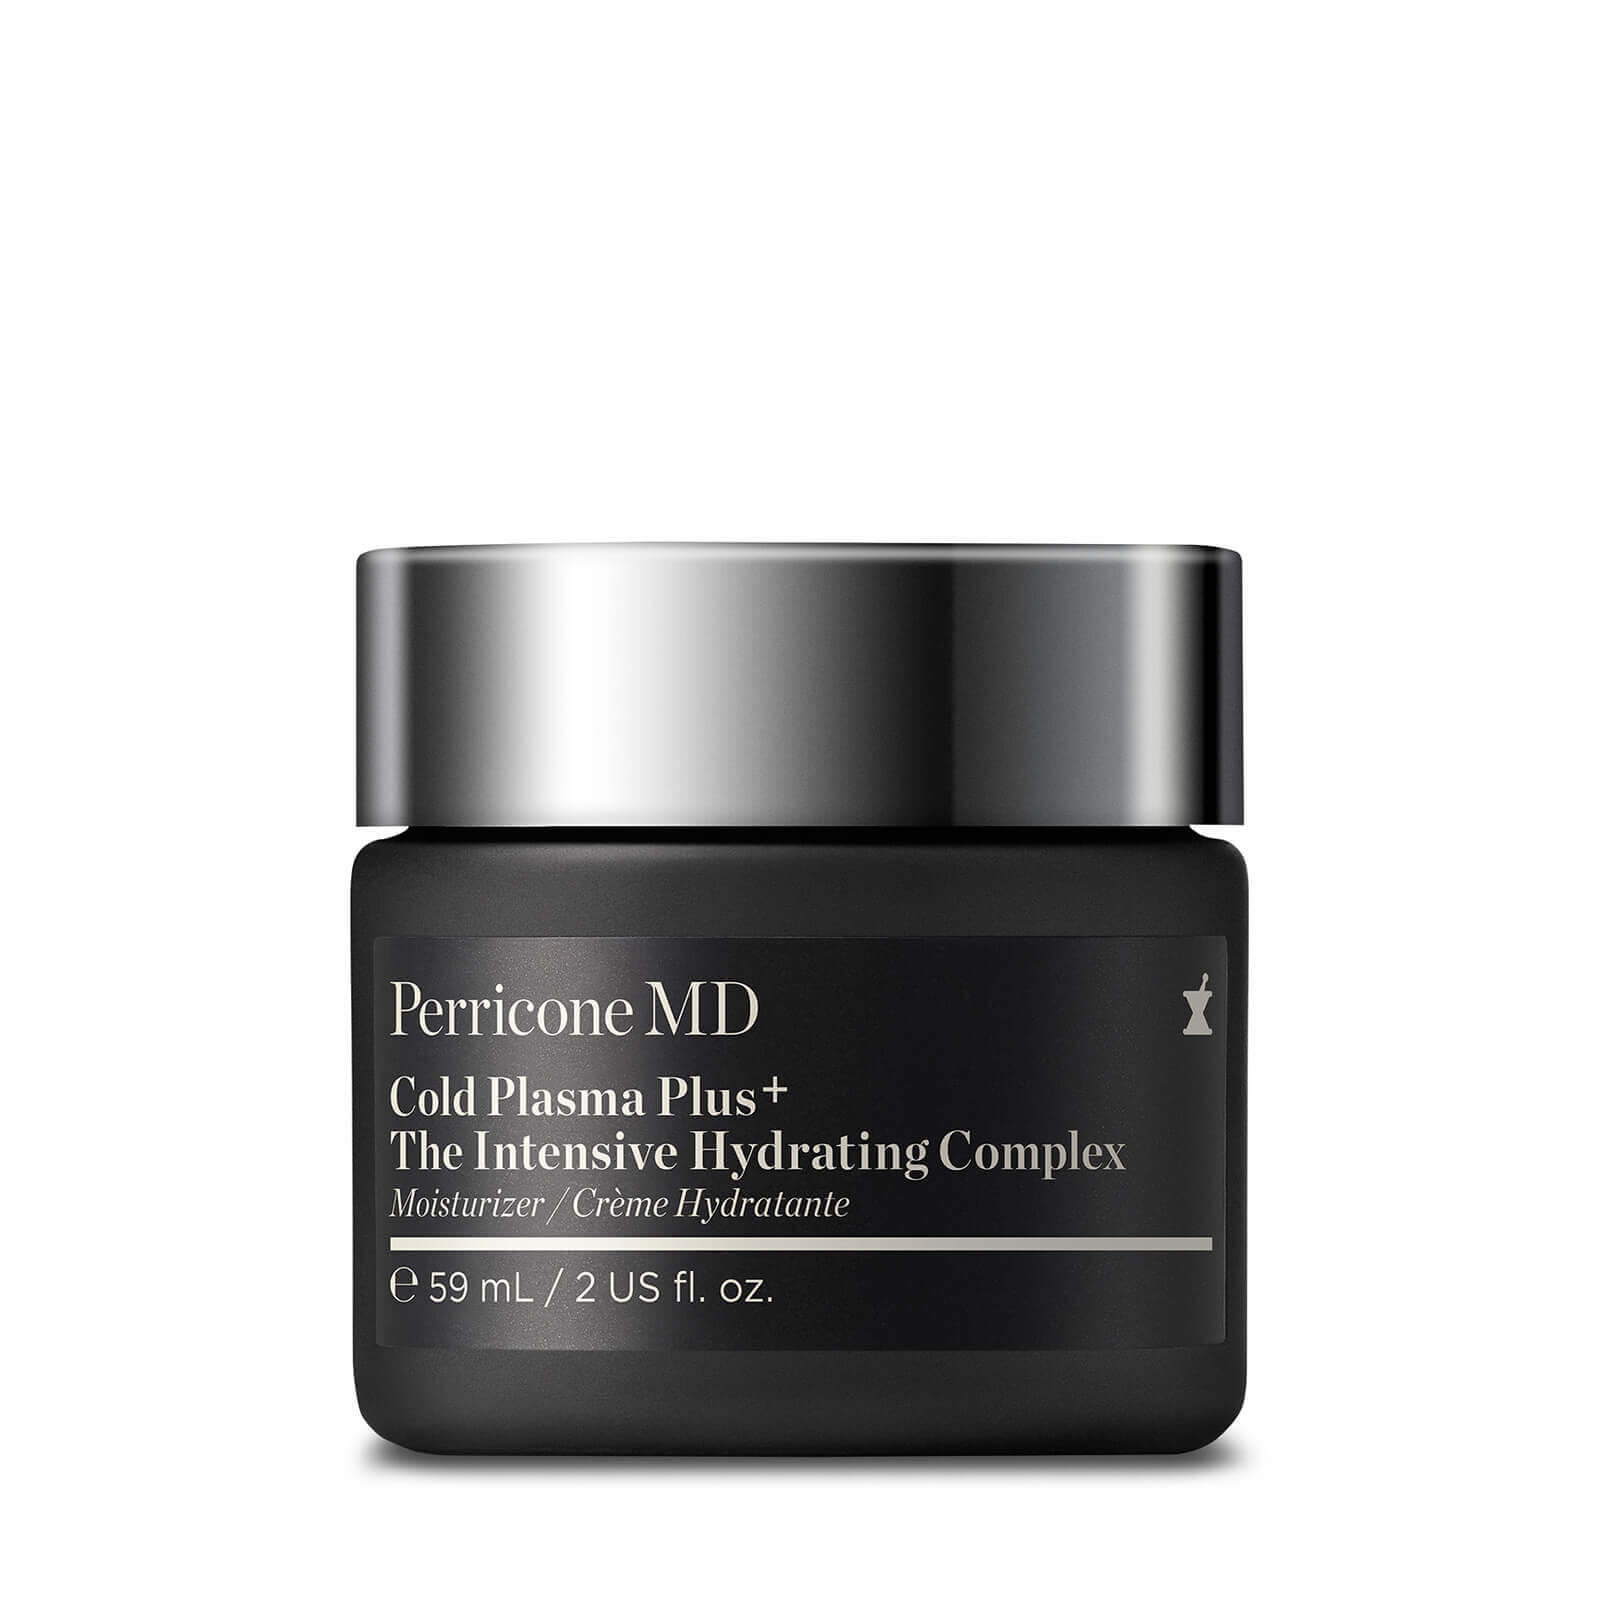 Perricone MD Cold Plasma Plus+ Intensive Hydrating Complex